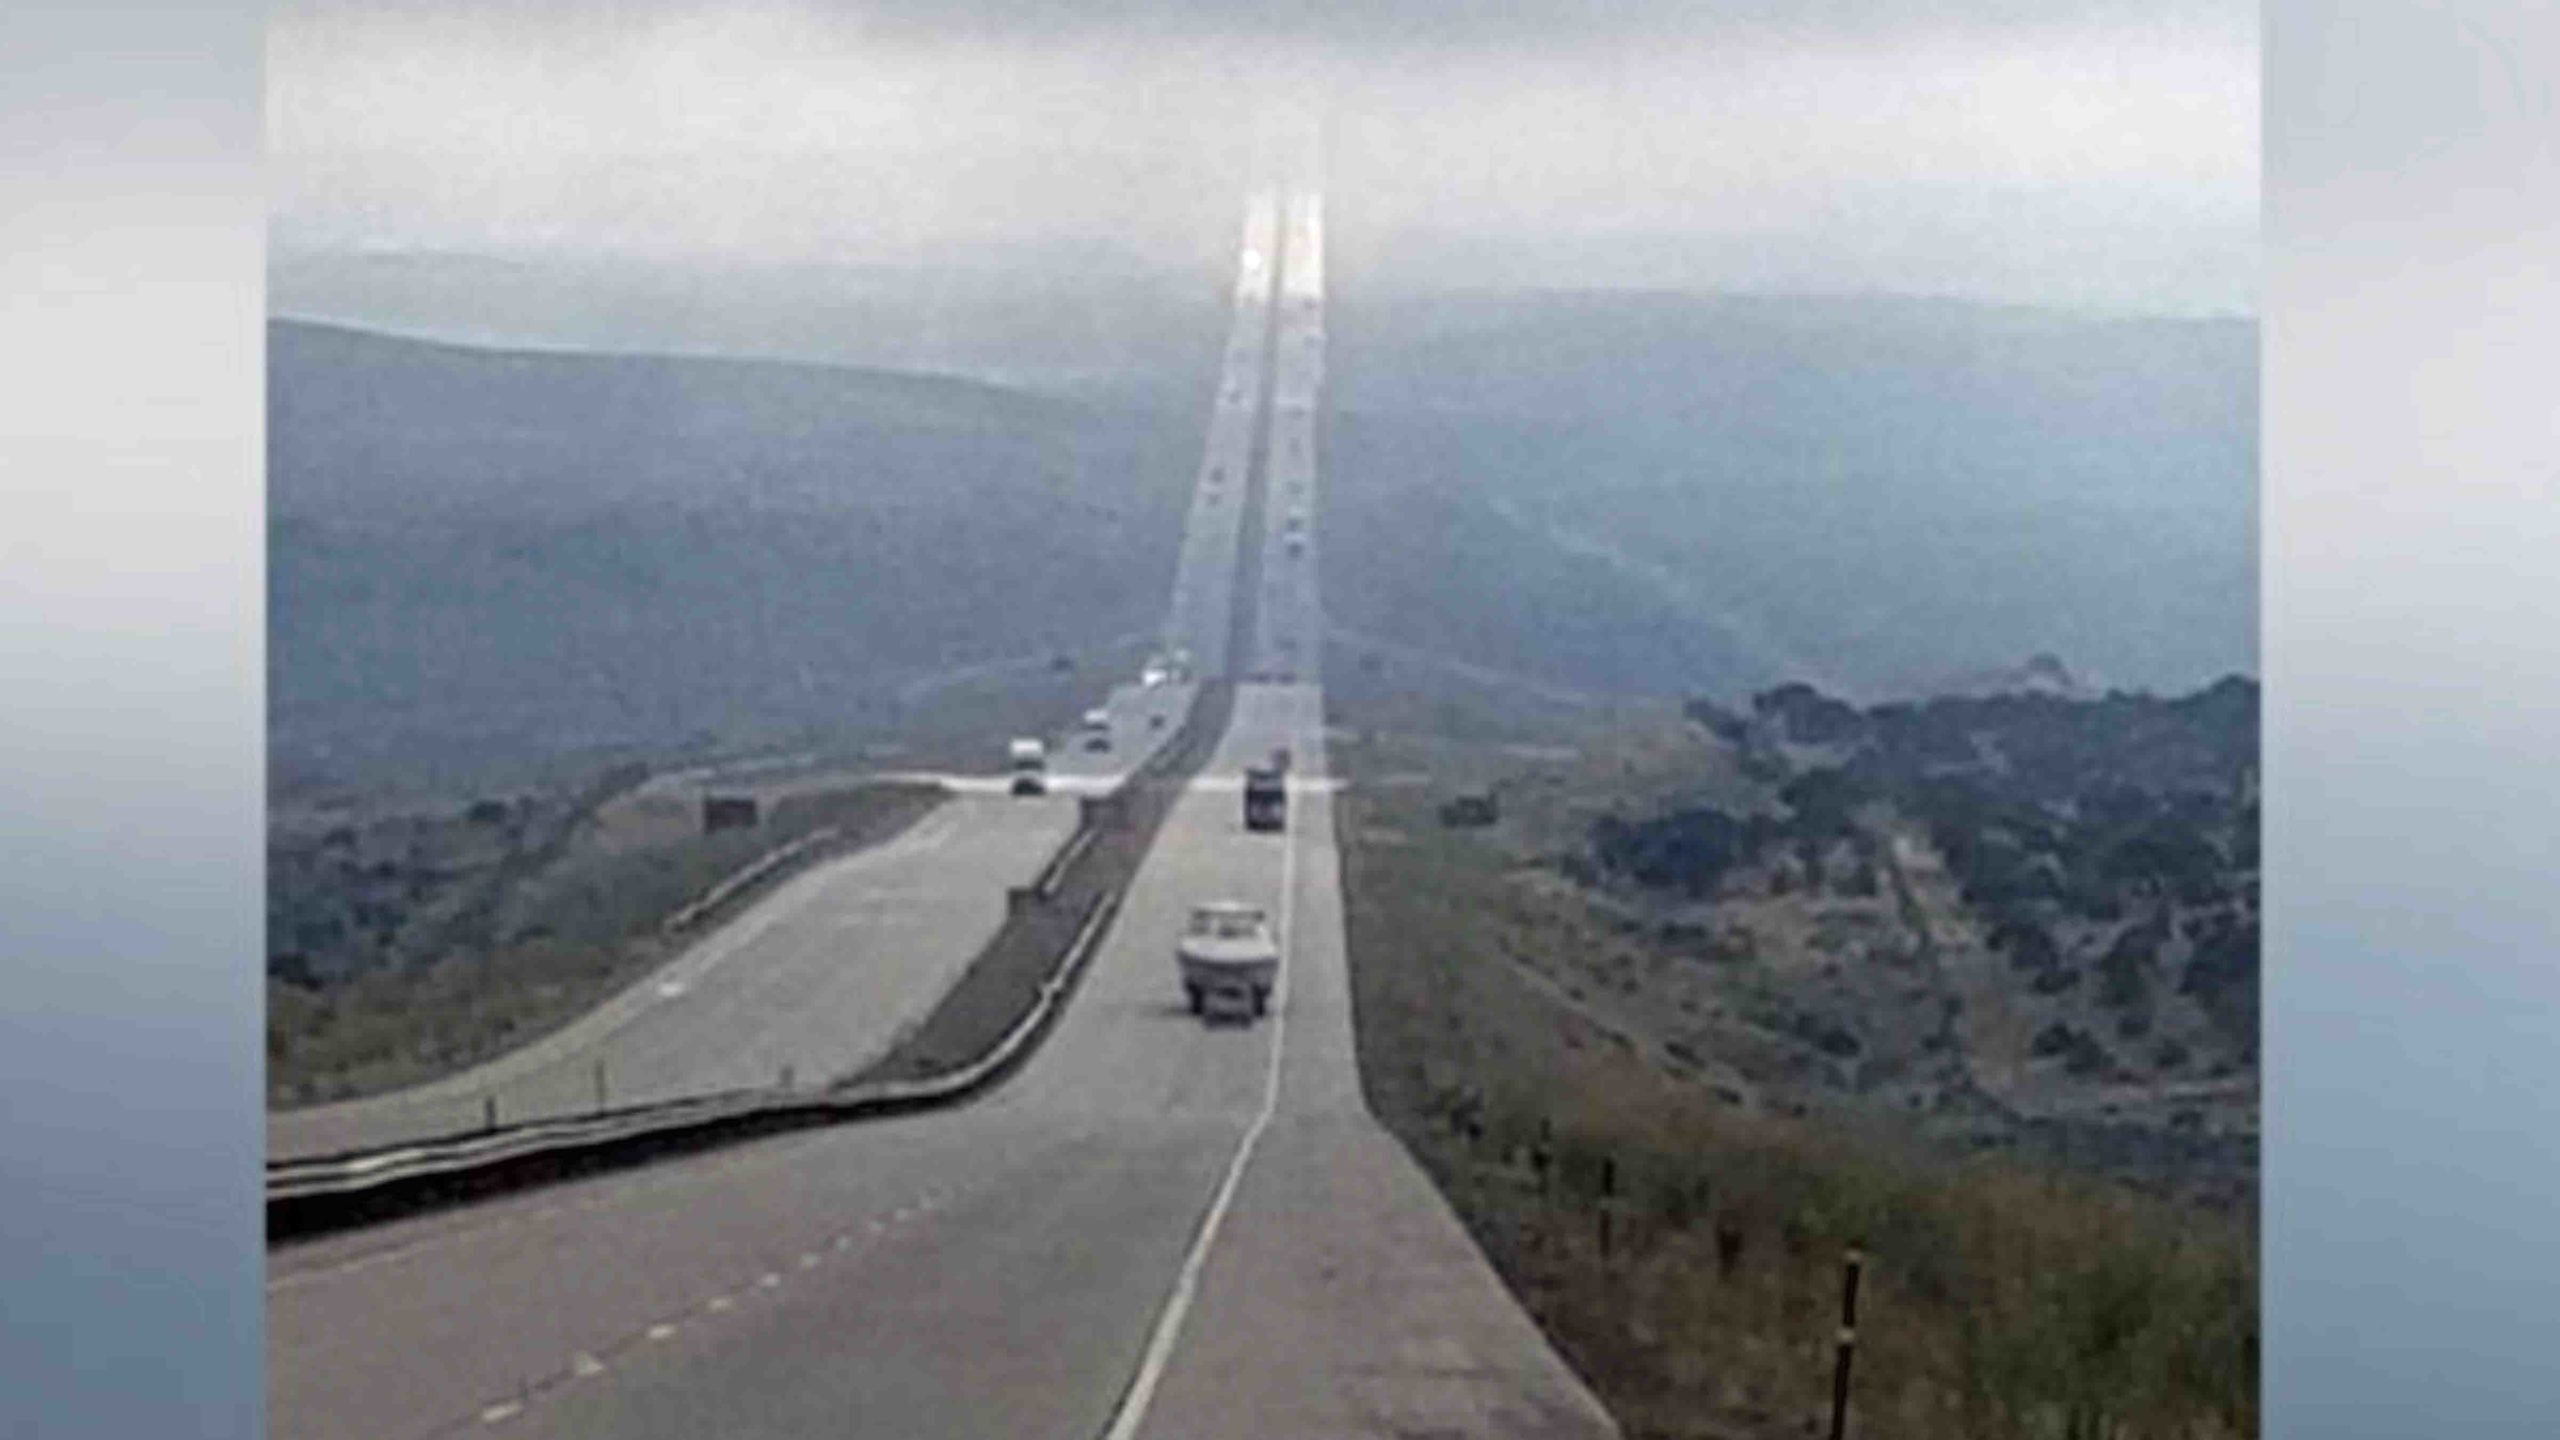 Wyoming's 'Highway To Heaven' Not A Hoax | Your Wyoming News Source